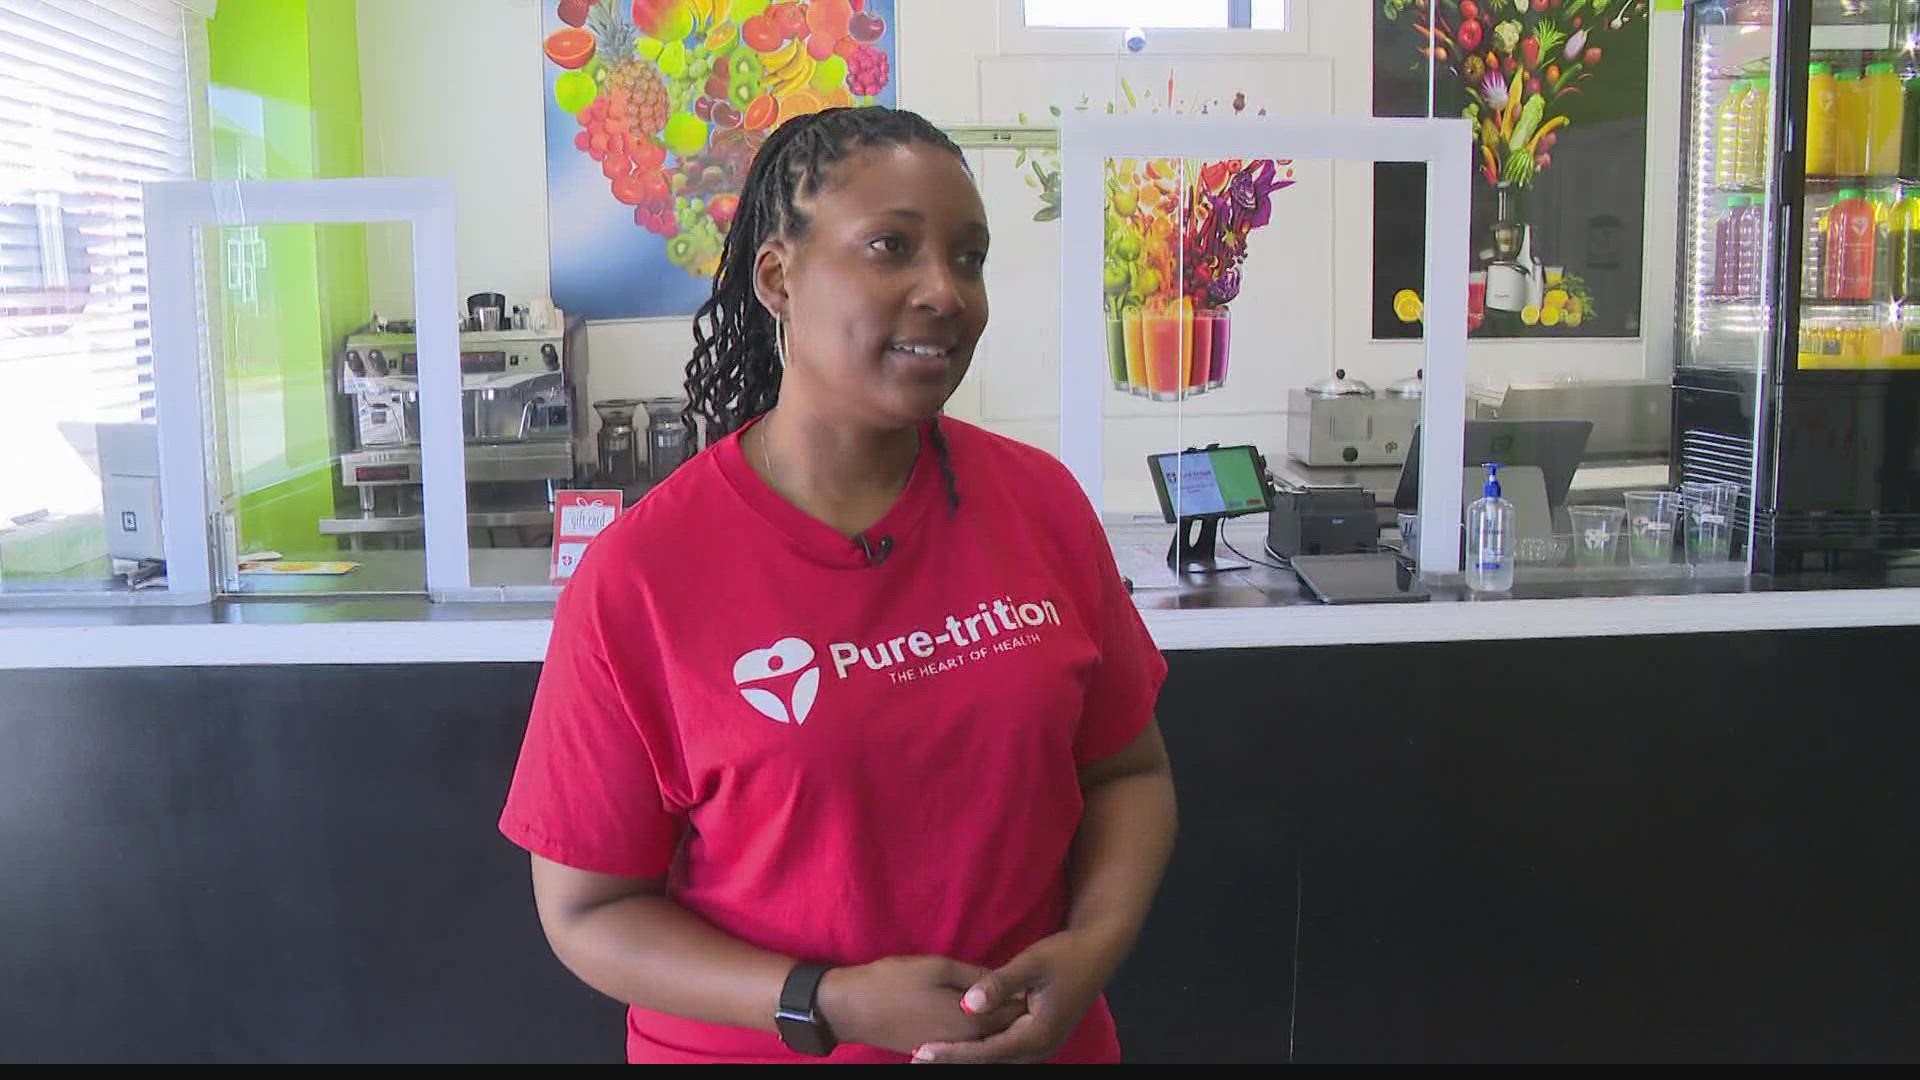 Aleta Osborn, owner of Pure-Trition juice and smoothie bar, said certain ingredients have been hard to come by, on back order or just more expensive.